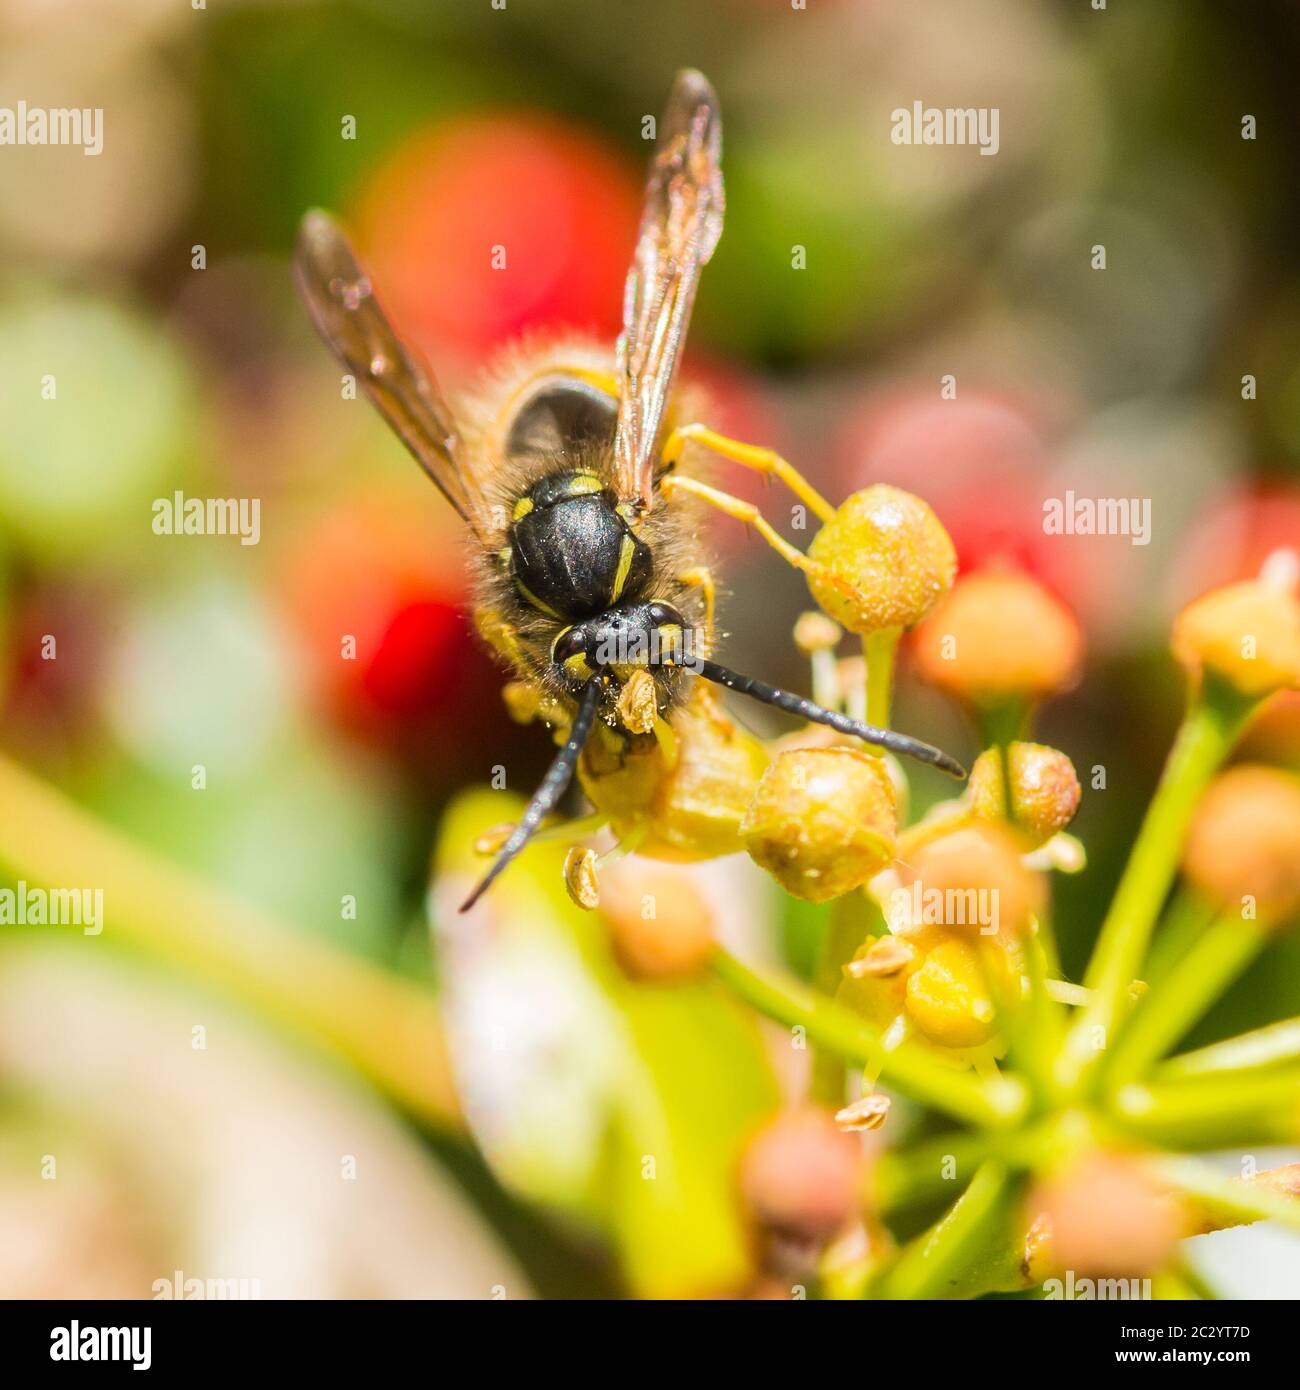 A macro shot of a common wasp collecting pollen from a common ivy plant. Stock Photo